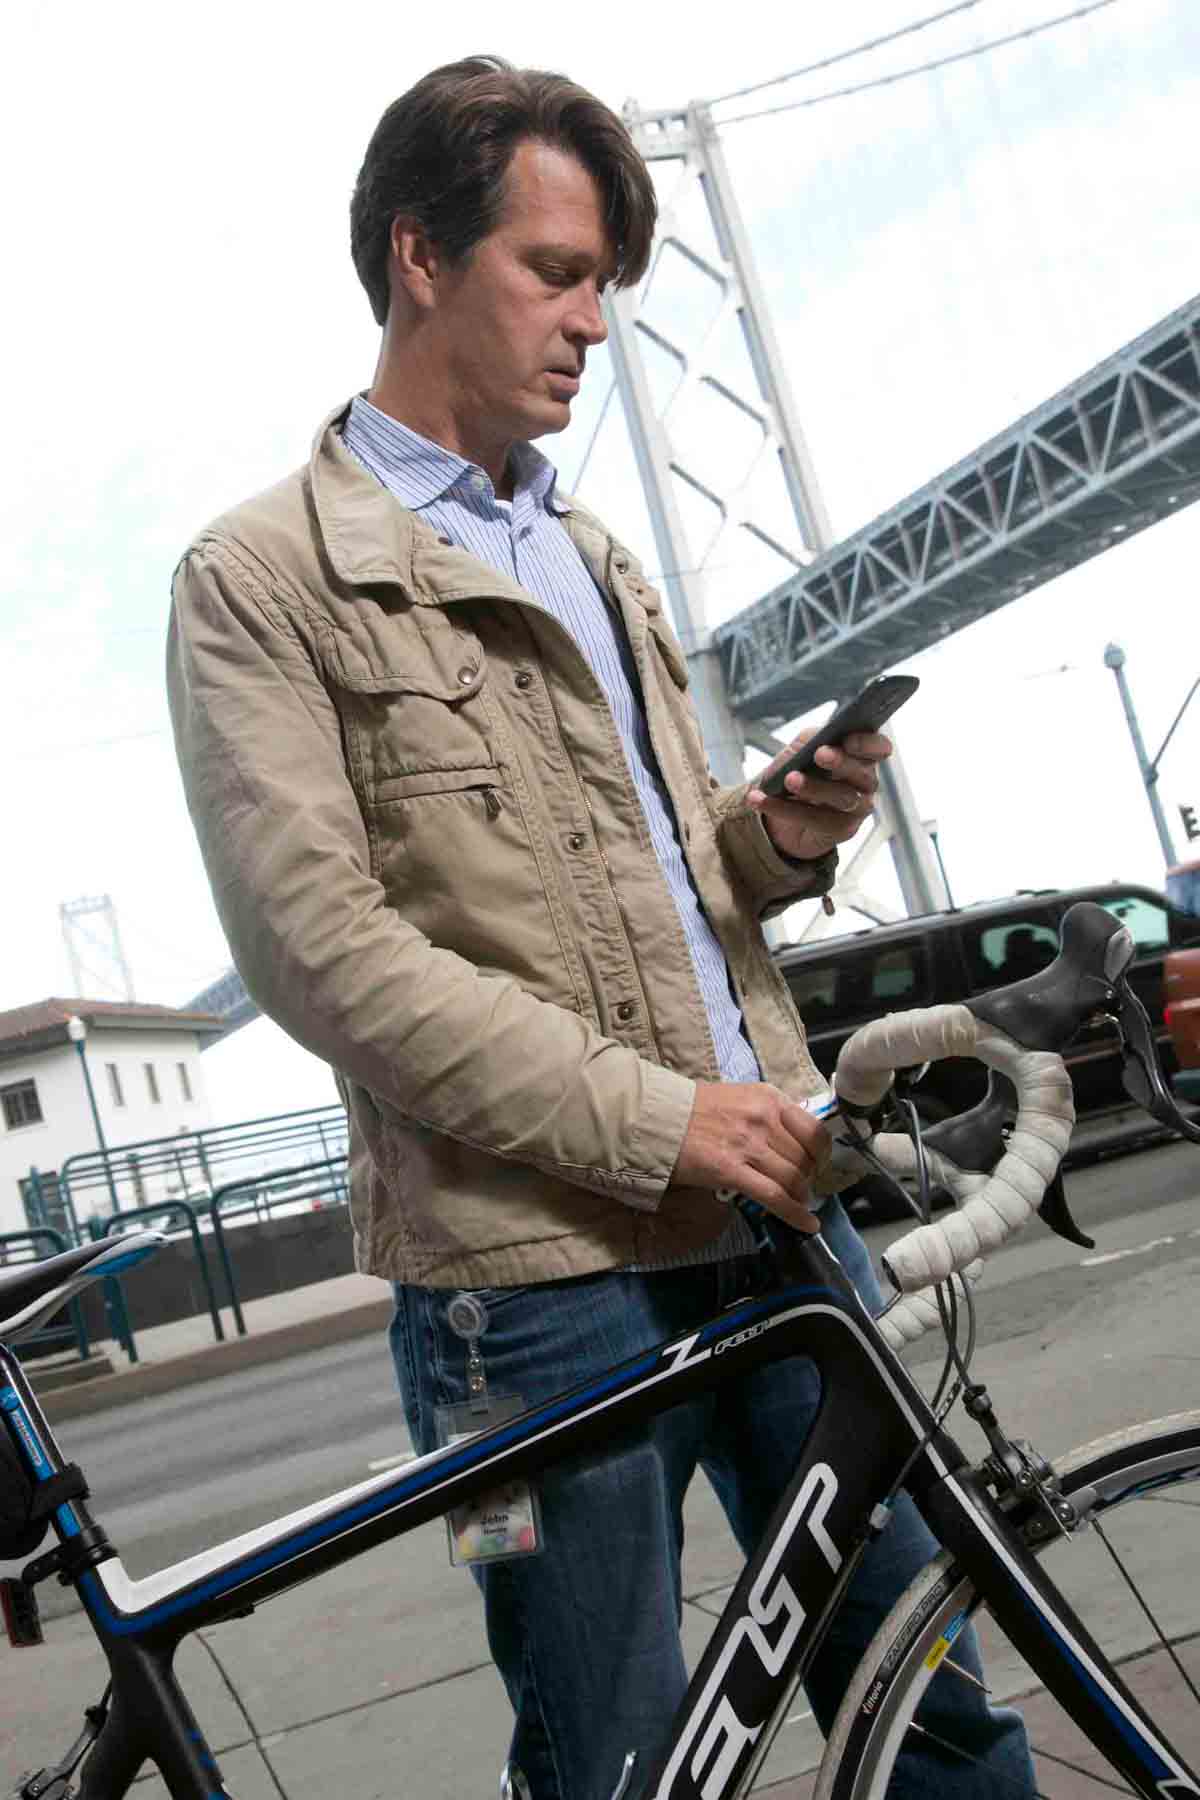 John Hanke standing next to a bike and holding an iPhone he is looking down at in front of a silver bridge.